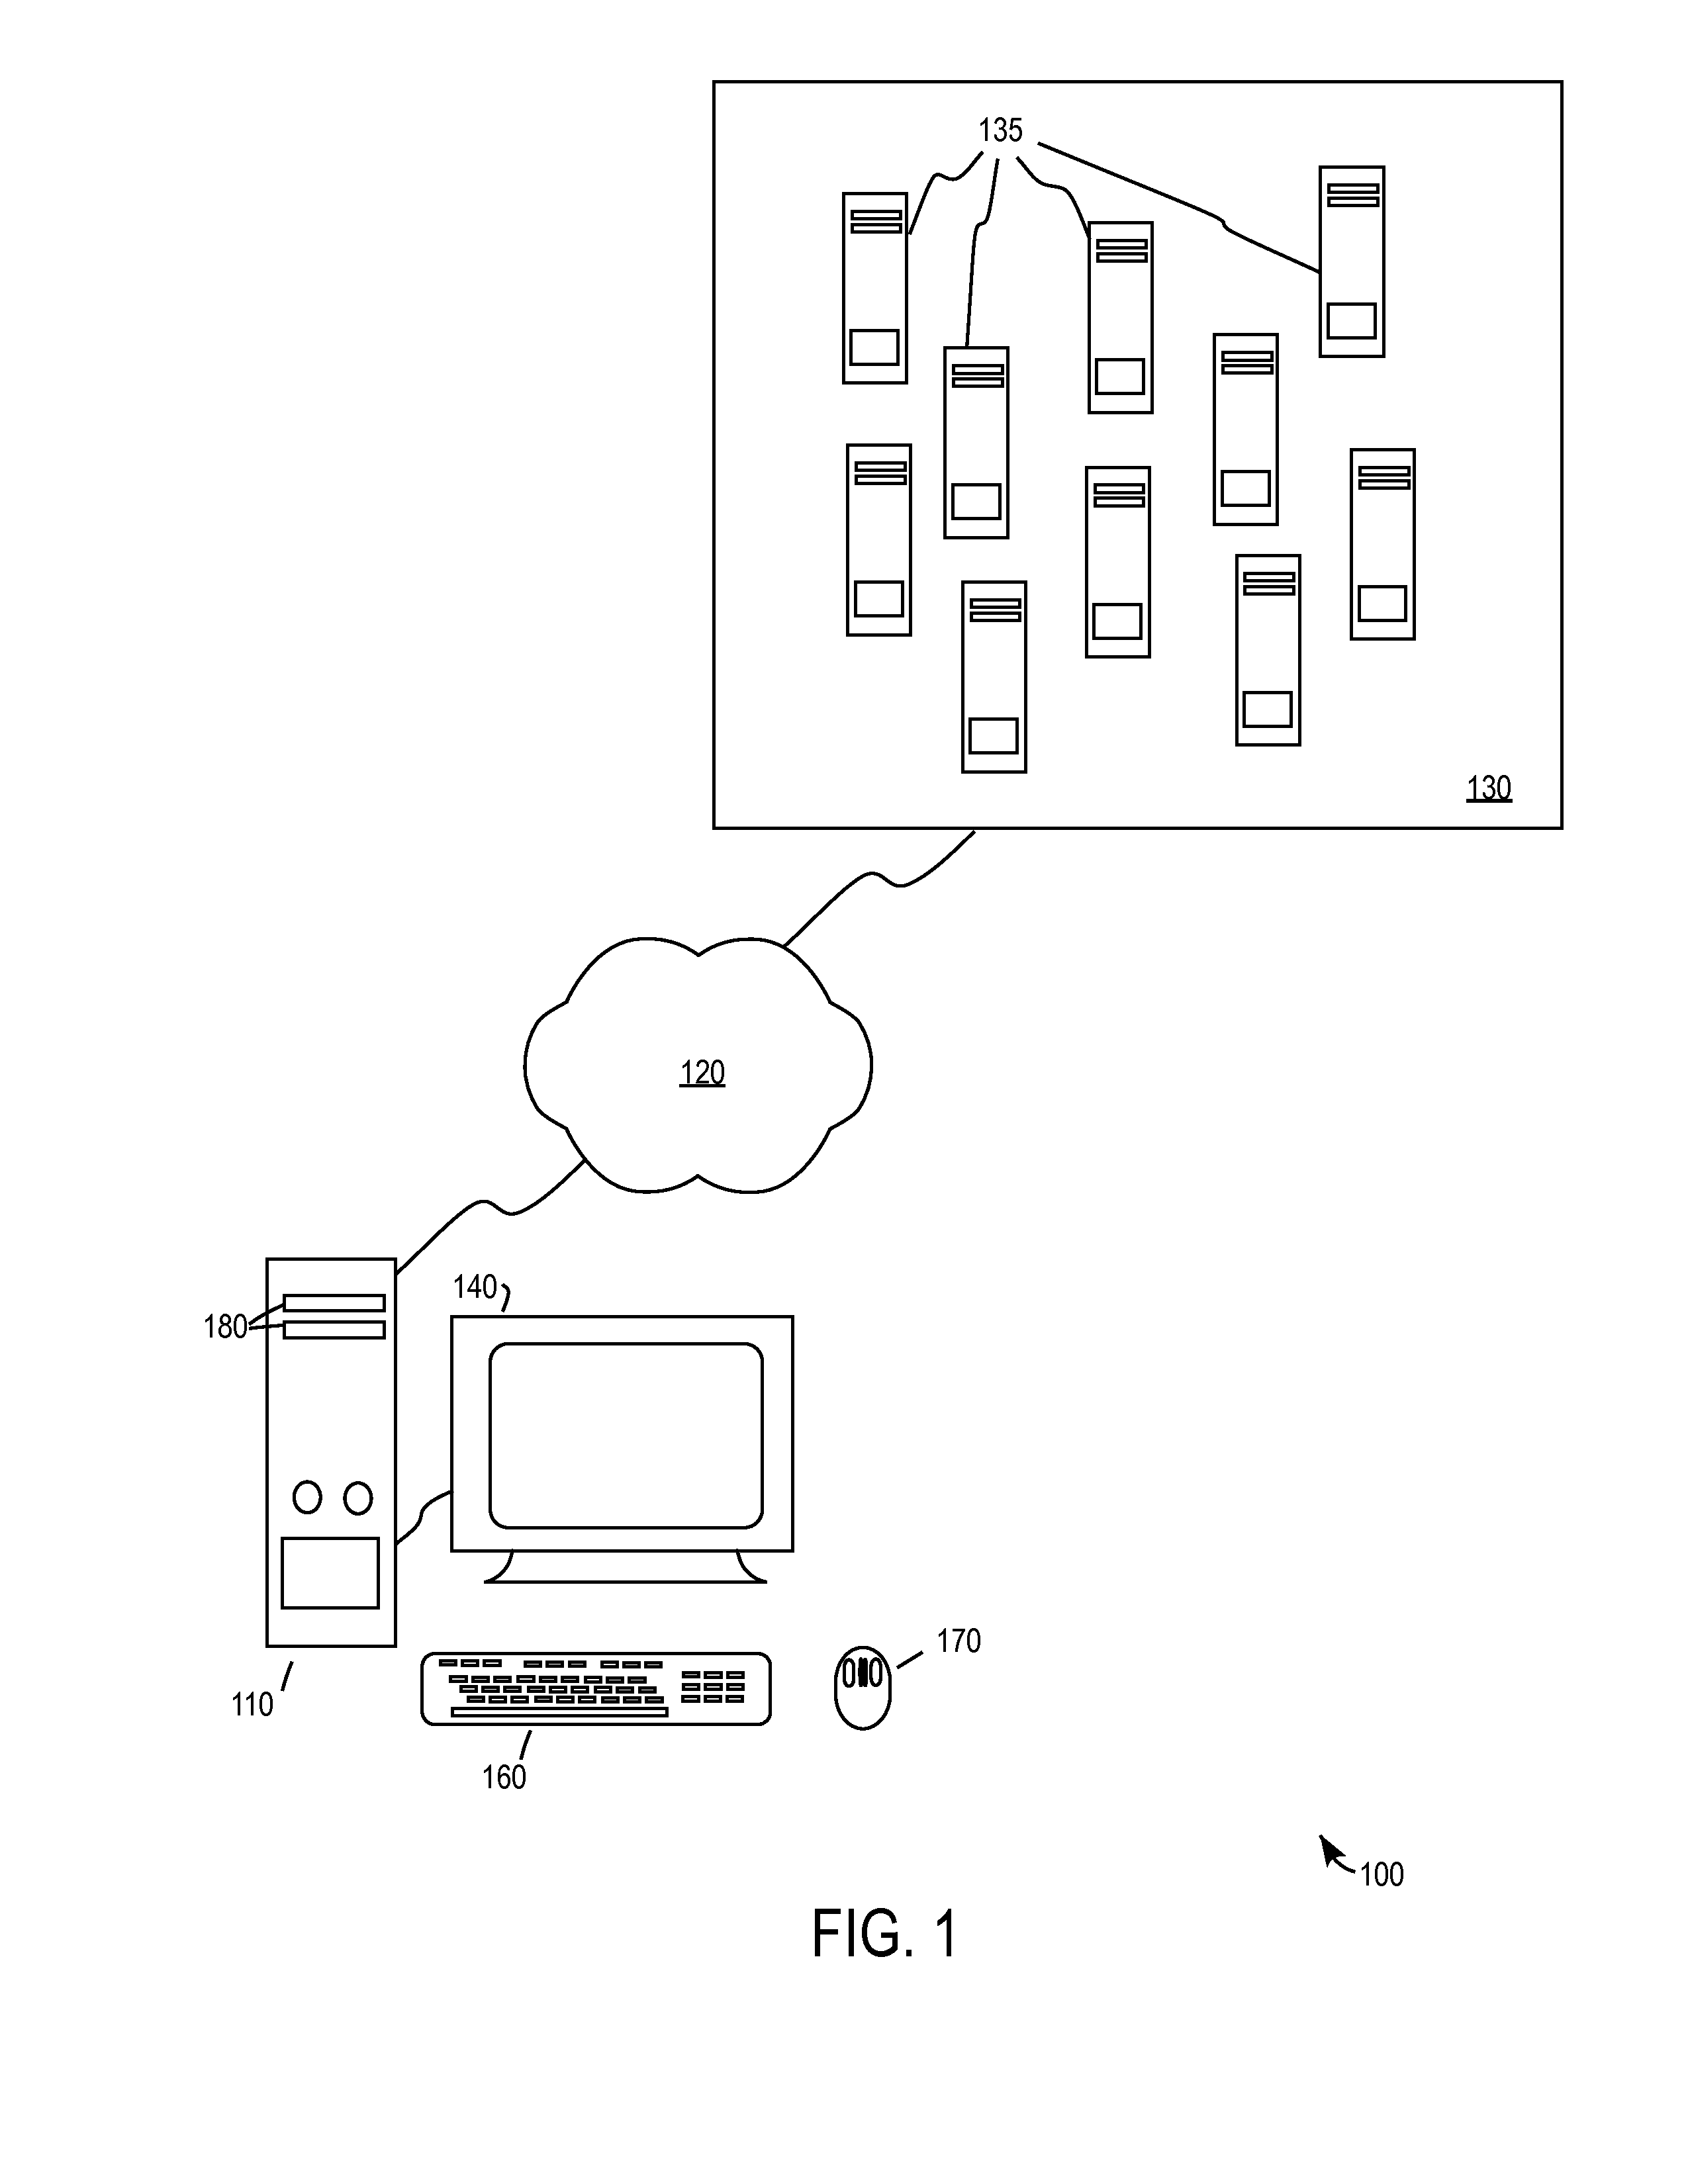 Automatic debug apparatus and method for automatic debug of an integrated circuit design